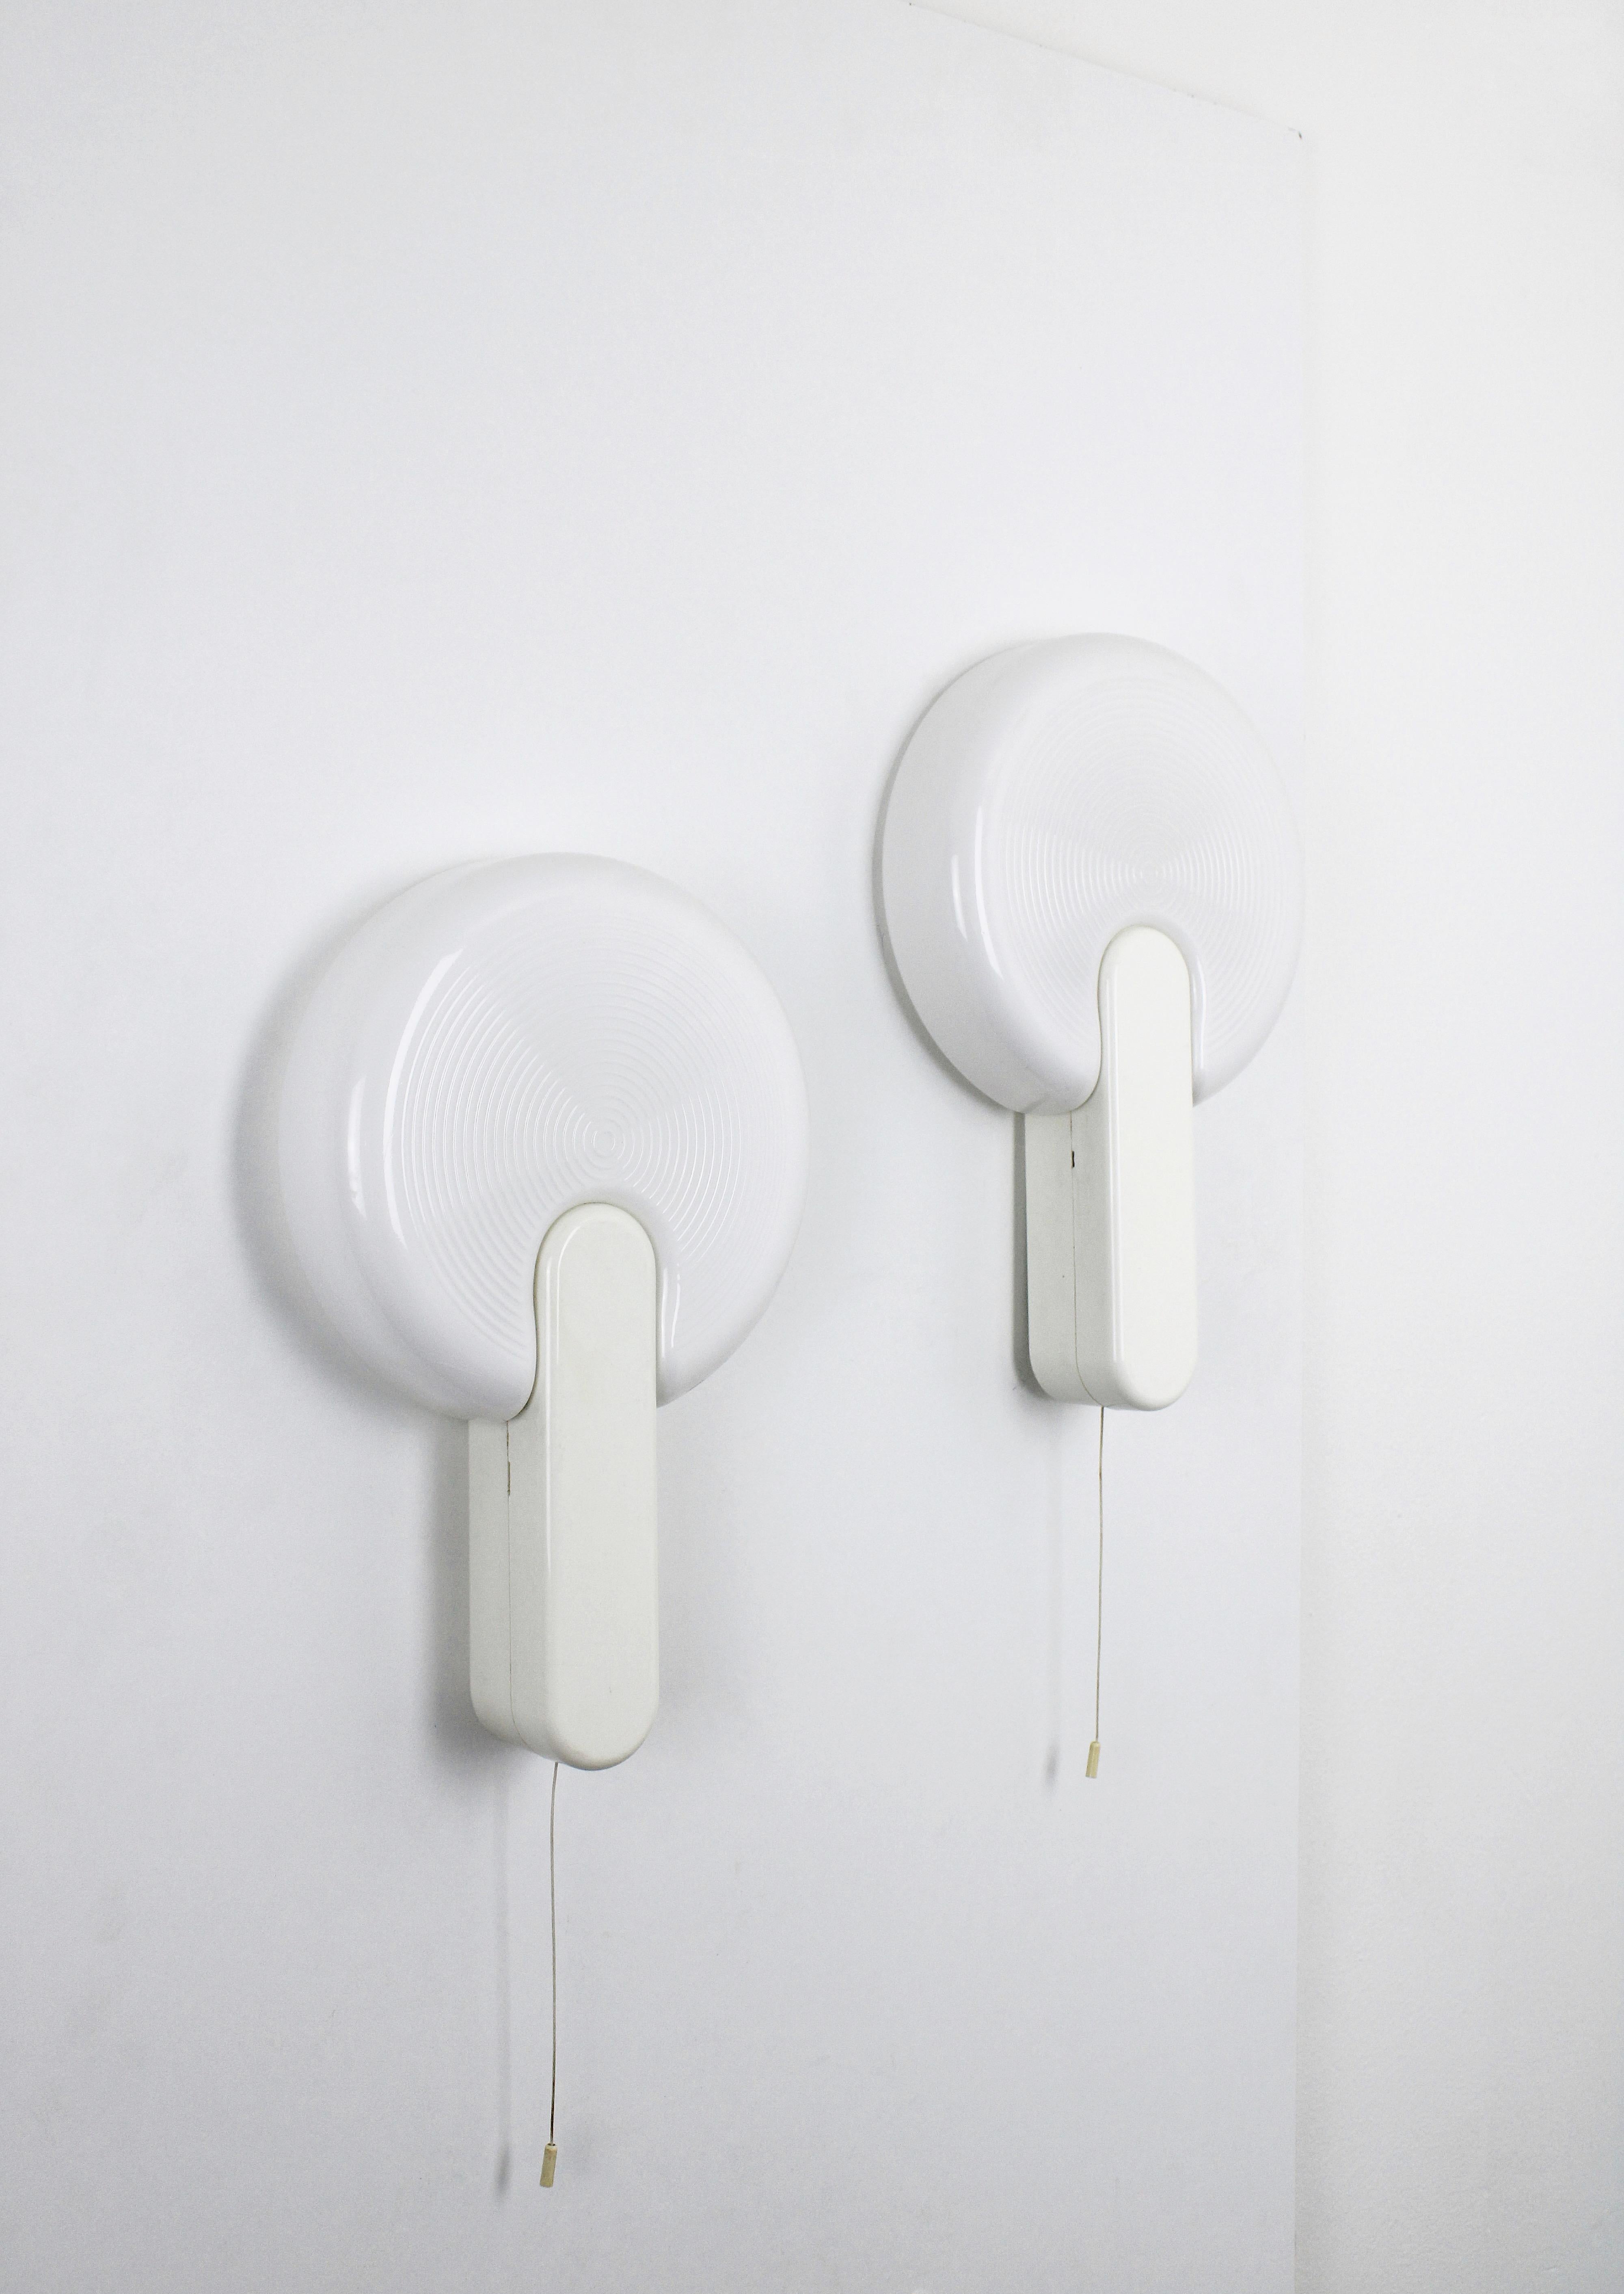 Extremely rare iGuzzini wall lamps. These lamps are part of the Ping-Pong series. Designed by the Japanese Masanori Umeda in 1979. That was before he worked with Memphis Milano and became world-famous for works such as the Getsuen lounge chair and